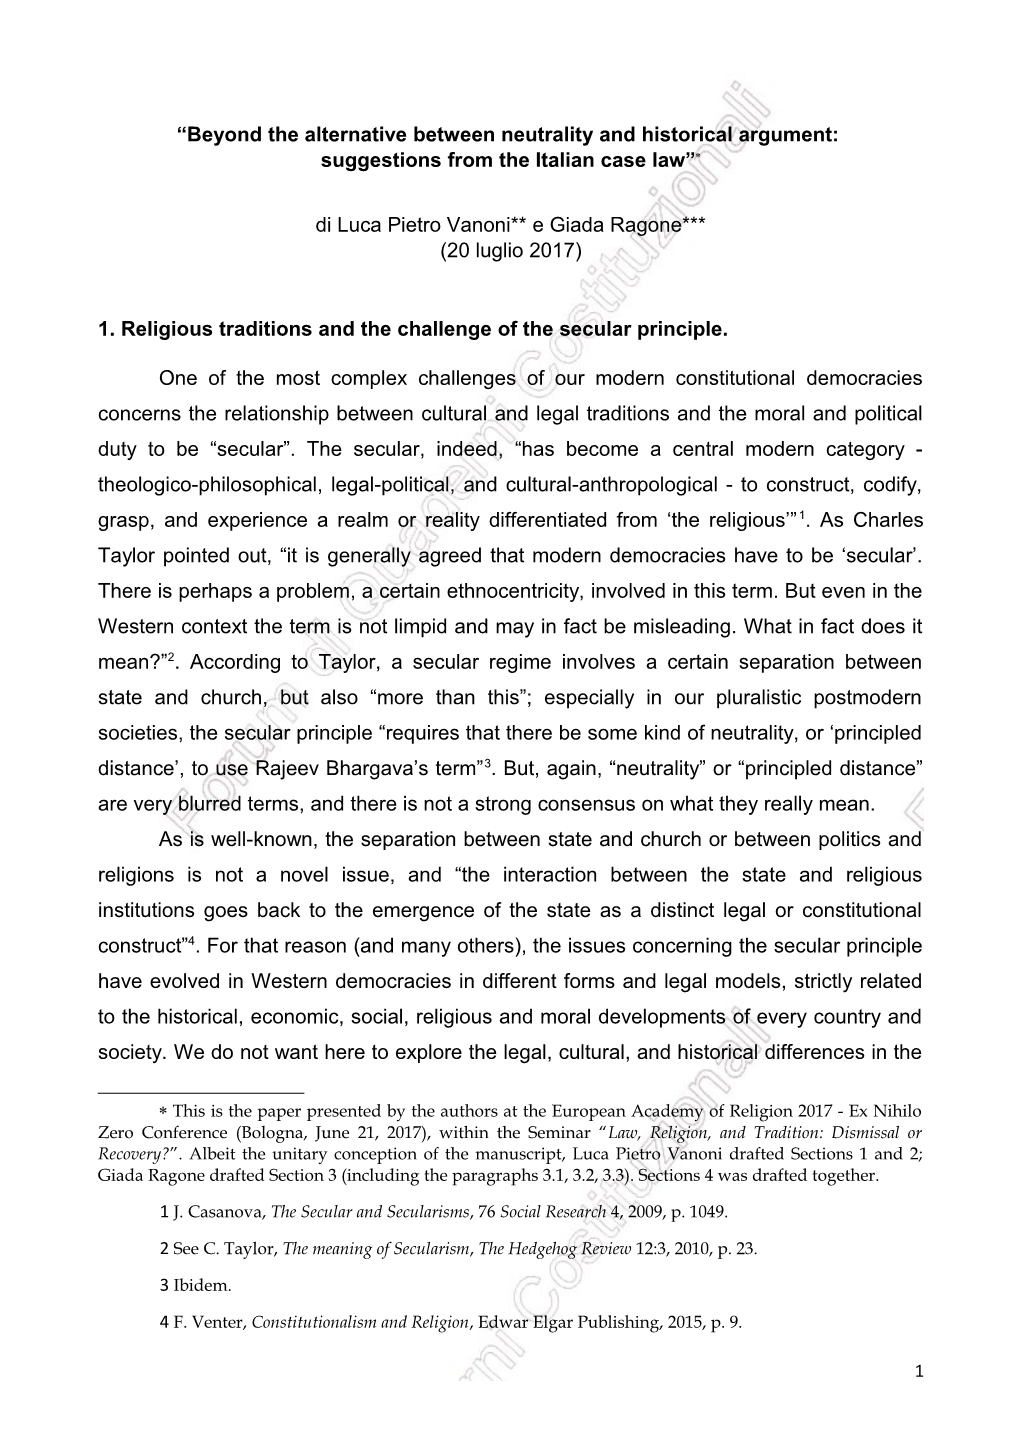 “Beyond the Alternative Between Neutrality and Historical Argument: Suggestions from the Italian Case Law”